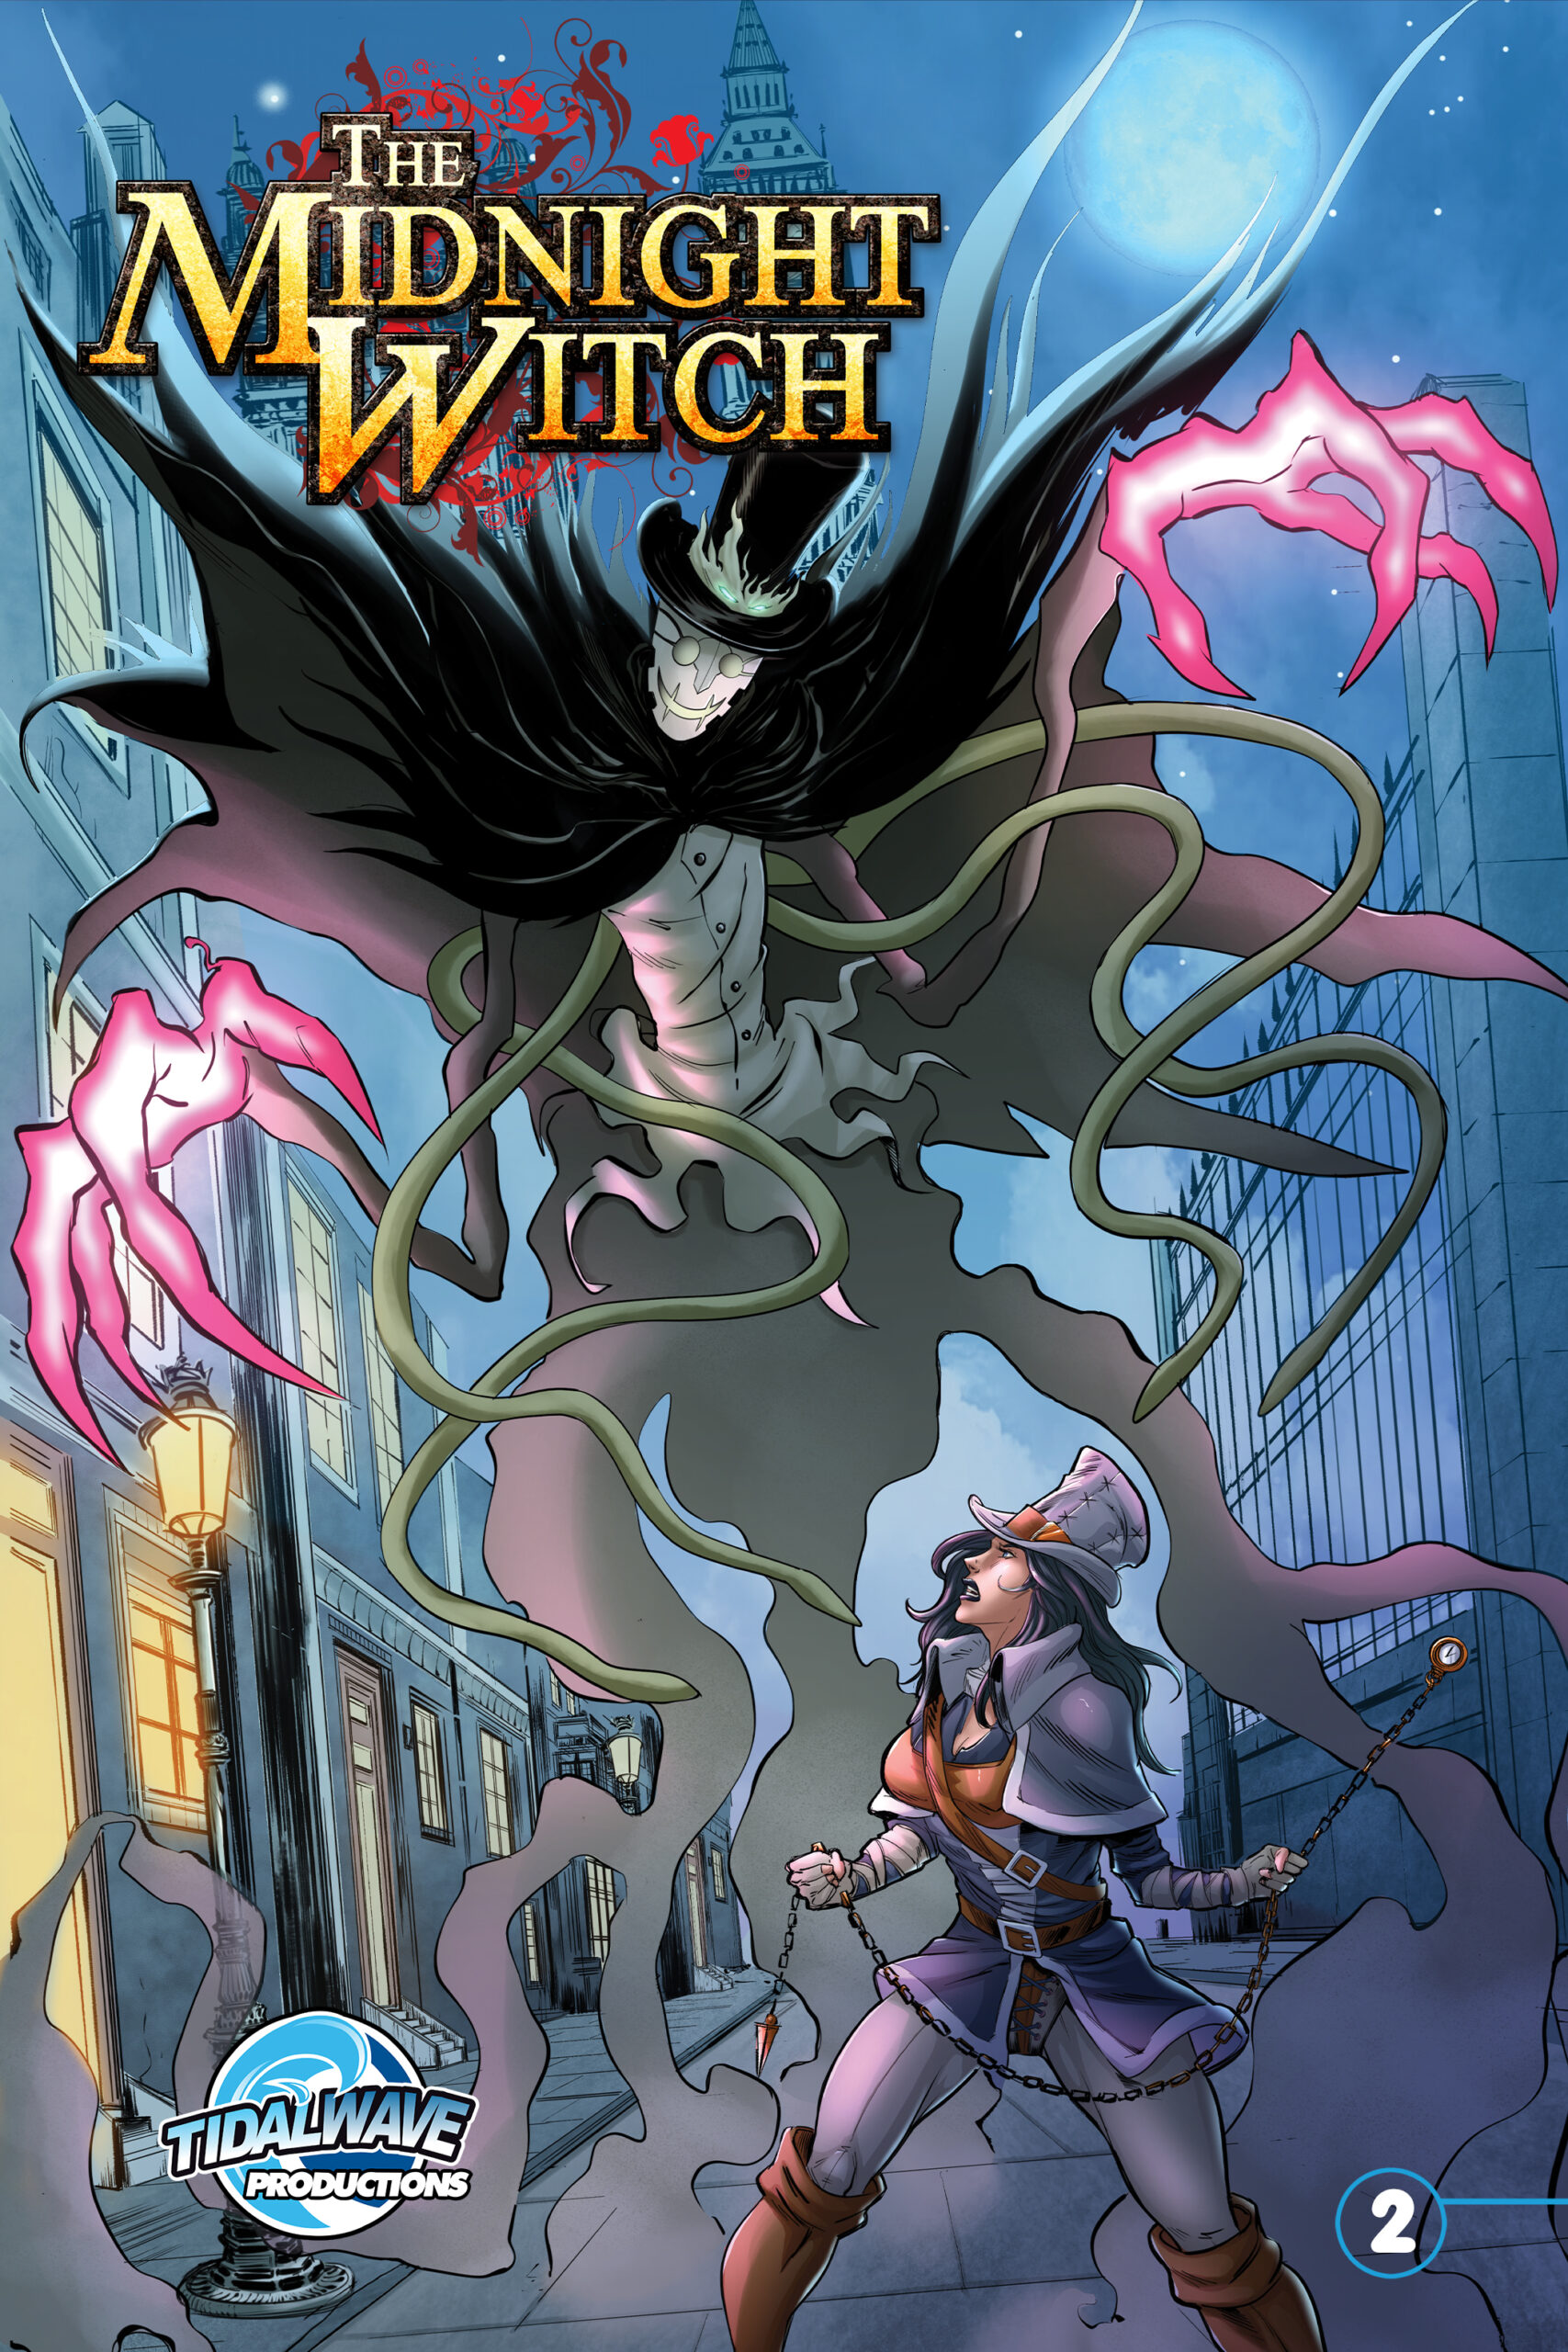 MIDNIGHT WITCH #4 1ST LOOK OUT NOW! - TidalWave Productions